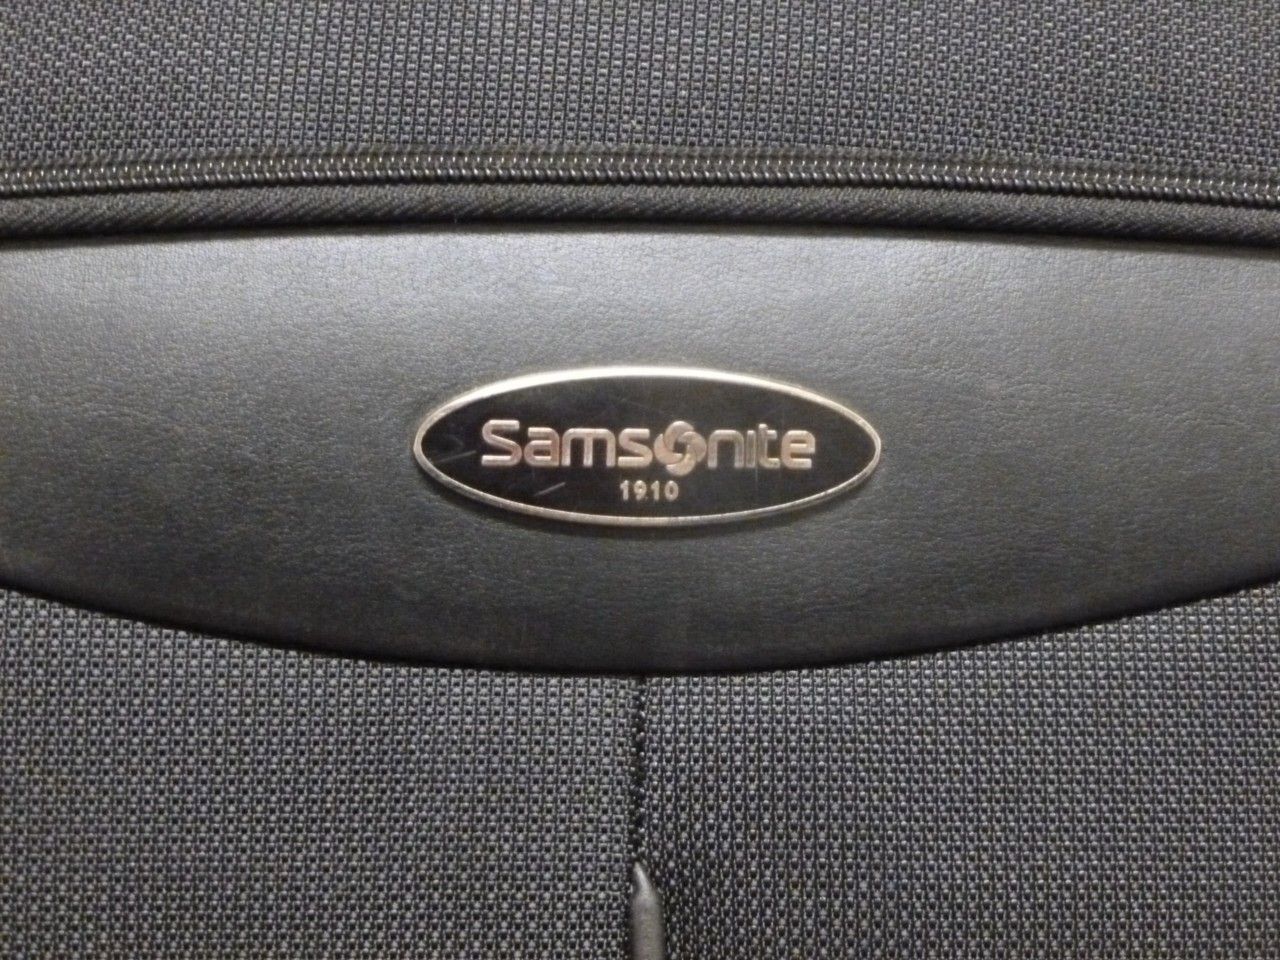  Samsonite 2 Piece Set 27 Spinner And 21 Carry On Black 4 Wheels